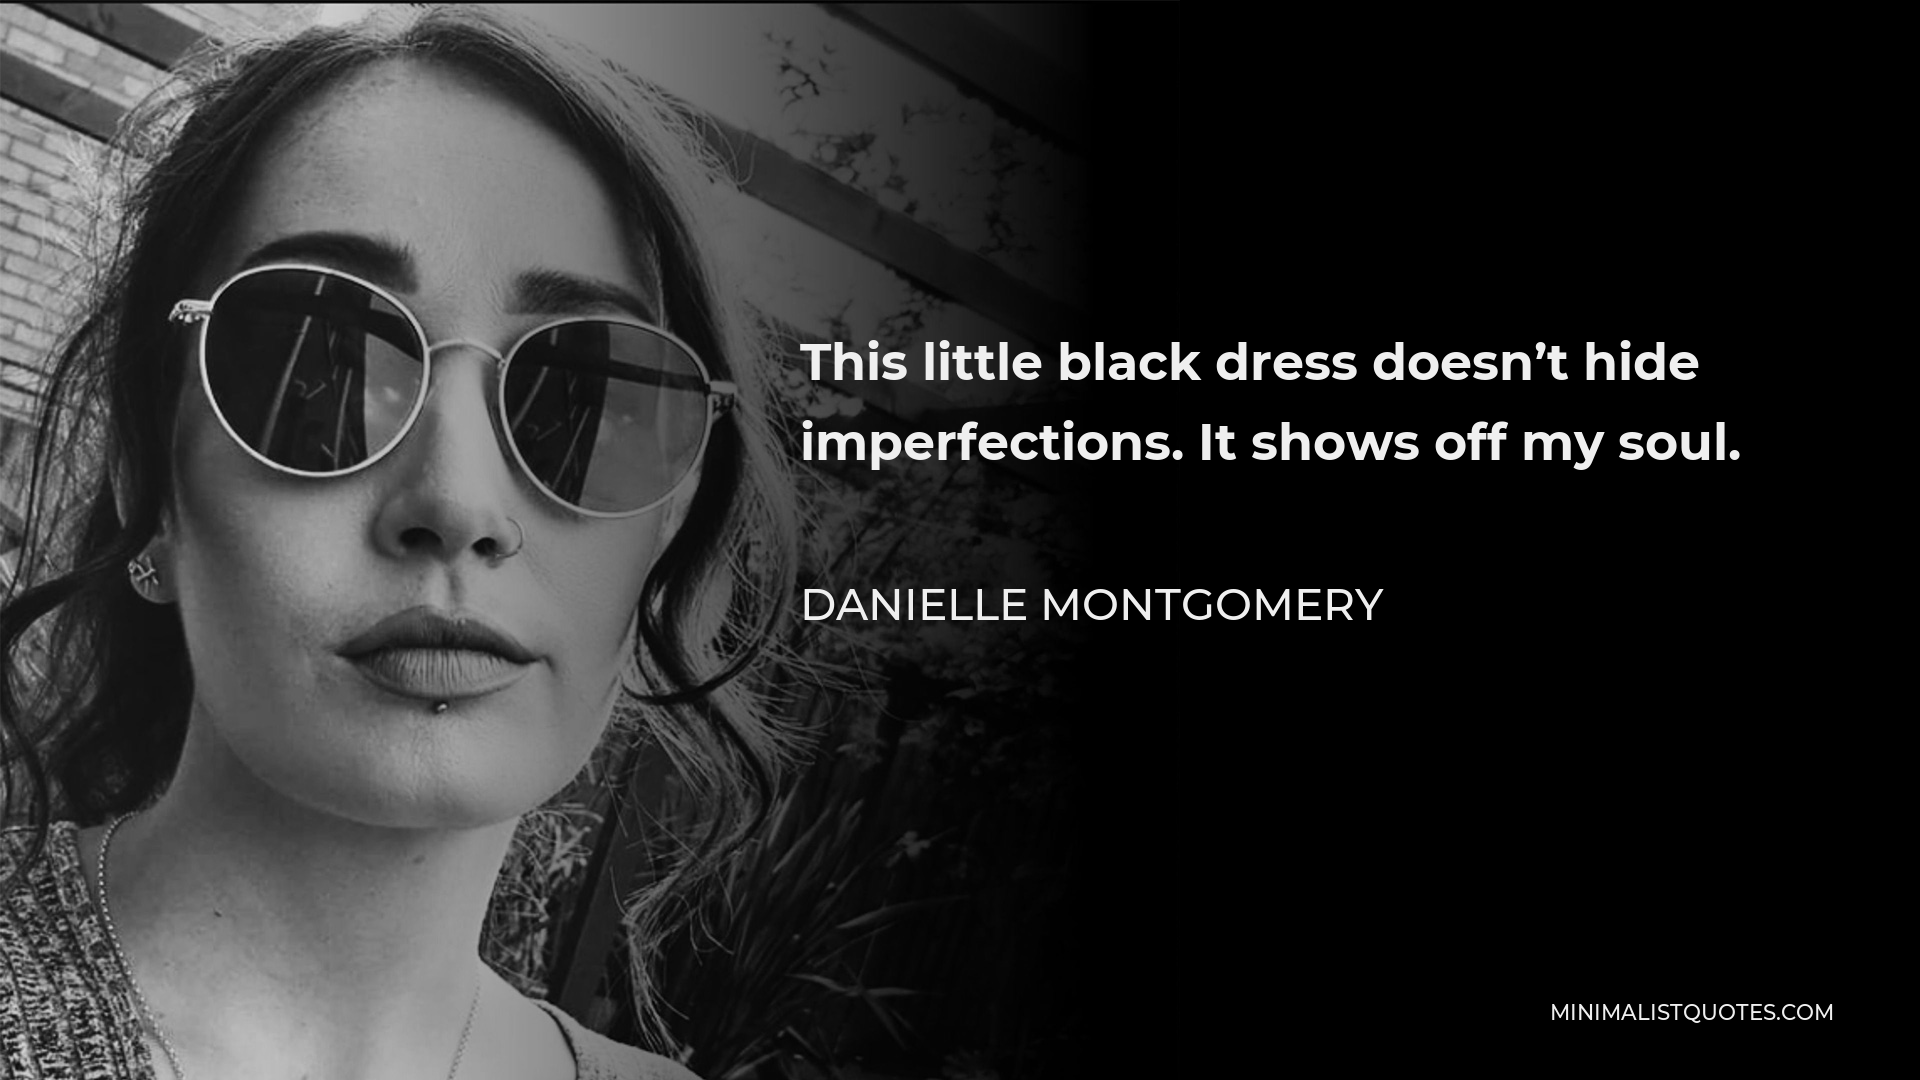 Danielle Montgomery Quote - This little black dress doesn’t hide imperfections. It shows off my soul.